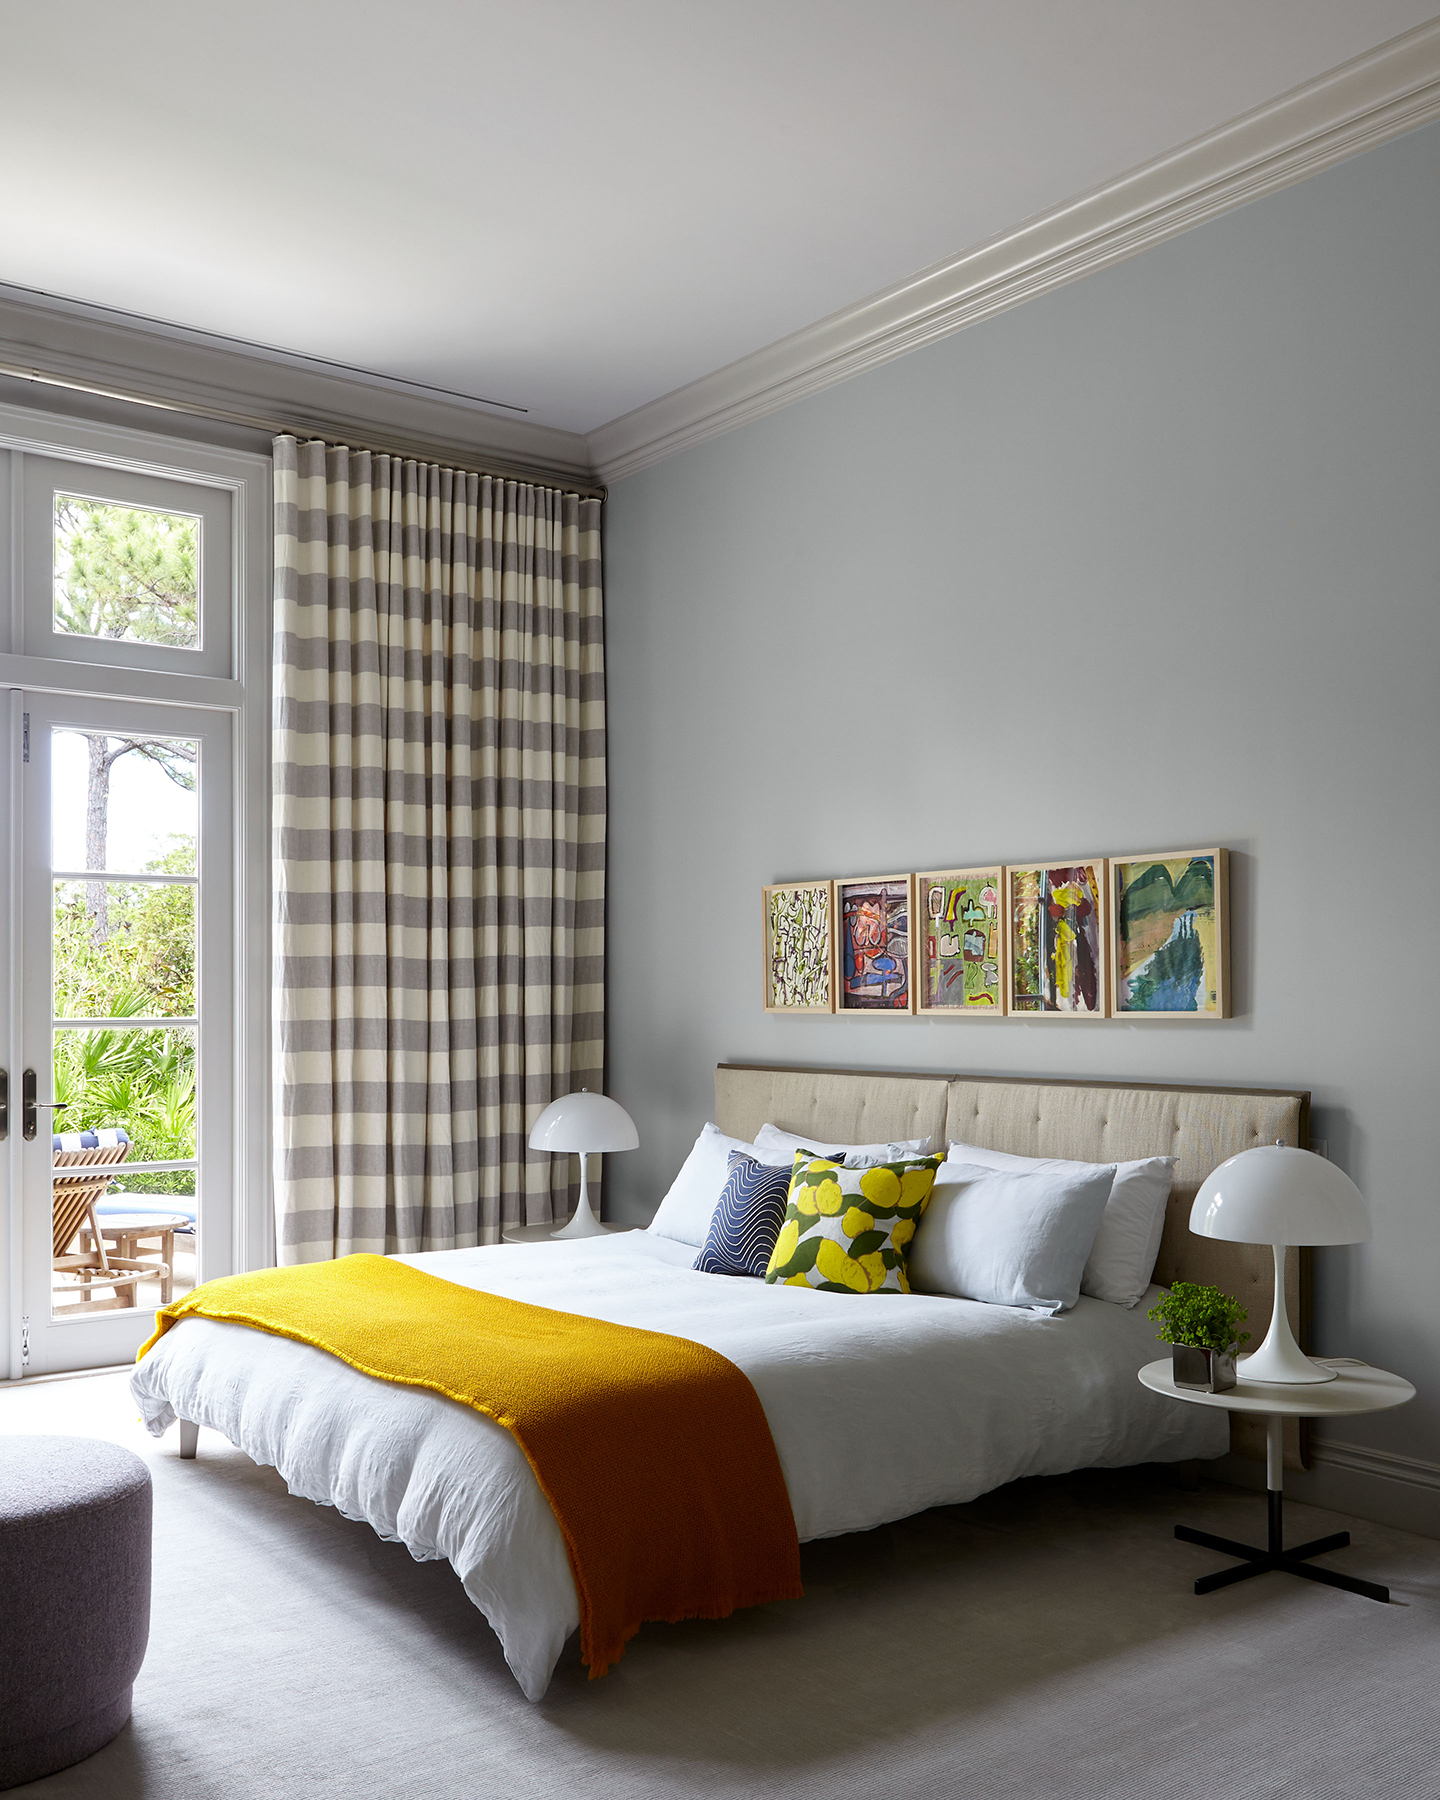 Bedroom with Yellow Throw